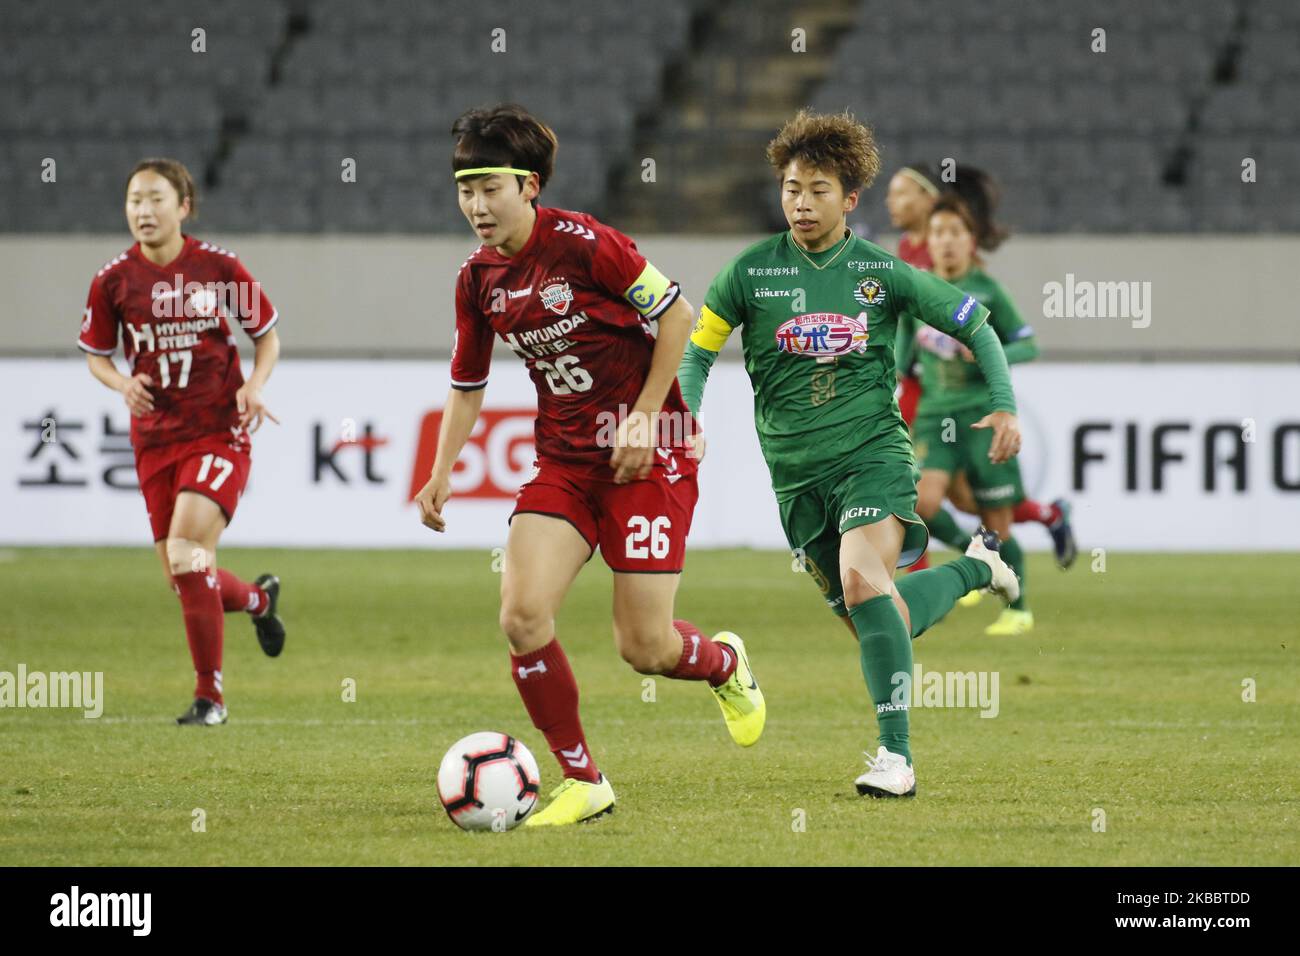 Seon-joo Lim (#26) of Hyundai Steel Red Angels of South Korea in action during an Women's Club Championship Pilot Incheon Hyundai Steel Red Angels v Nippon TV on